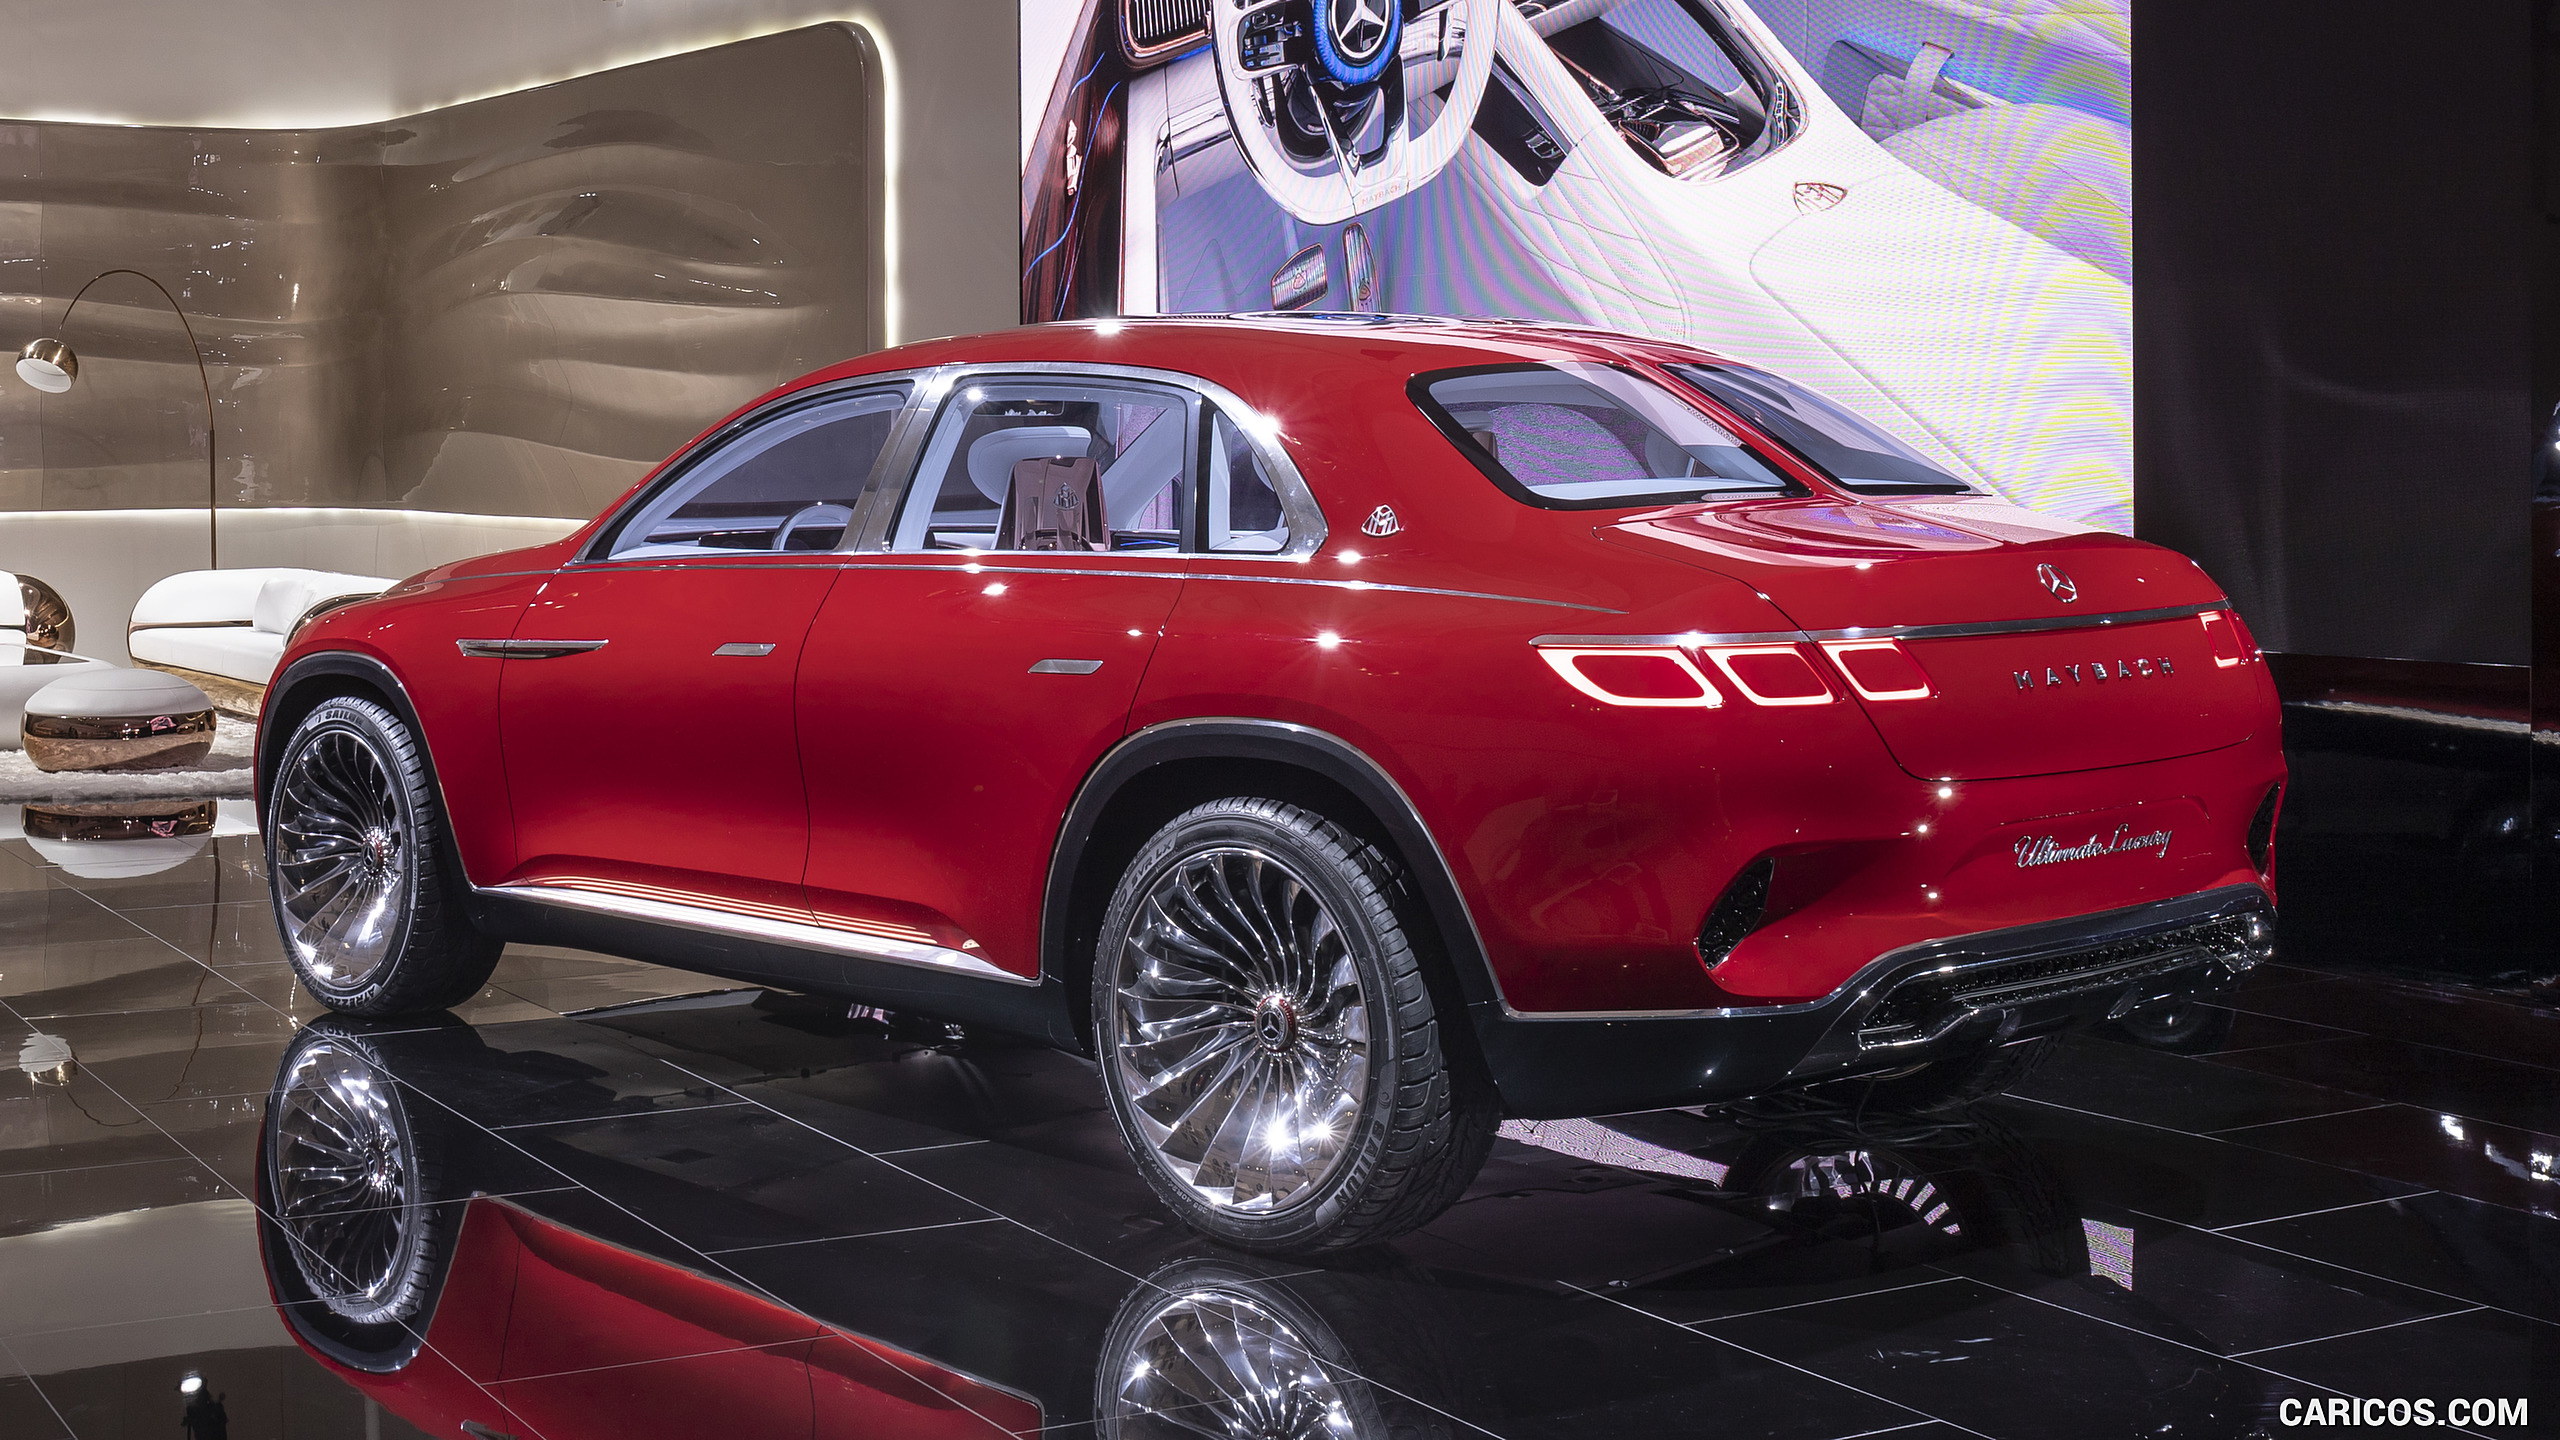 2018 Mercedes-Maybach Vision Ultimate Luxury SUV Concept - Rear Three-Quarter, #11 of 41